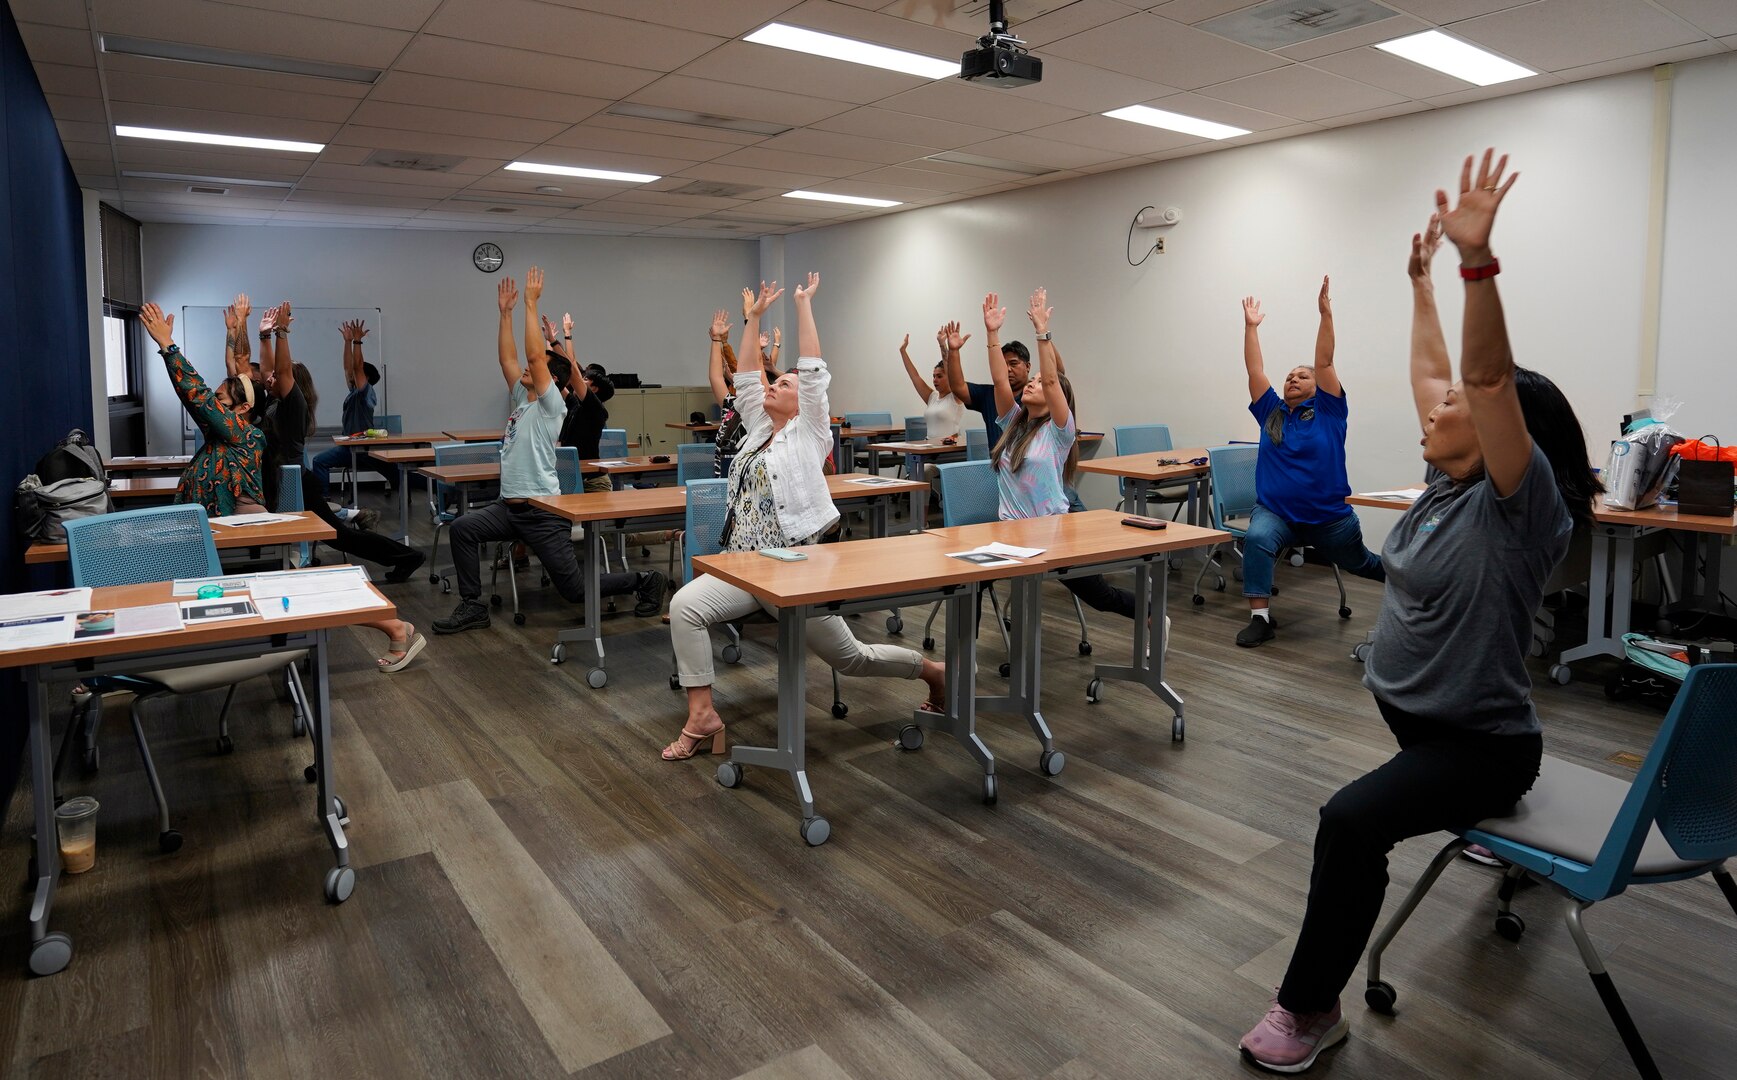 Mae Lynne from Kaiser Permanete, right, leads shipyard personnel through a yoga flow during a chair yoga stretch class at Pearl Harbor Naval Shipyard.